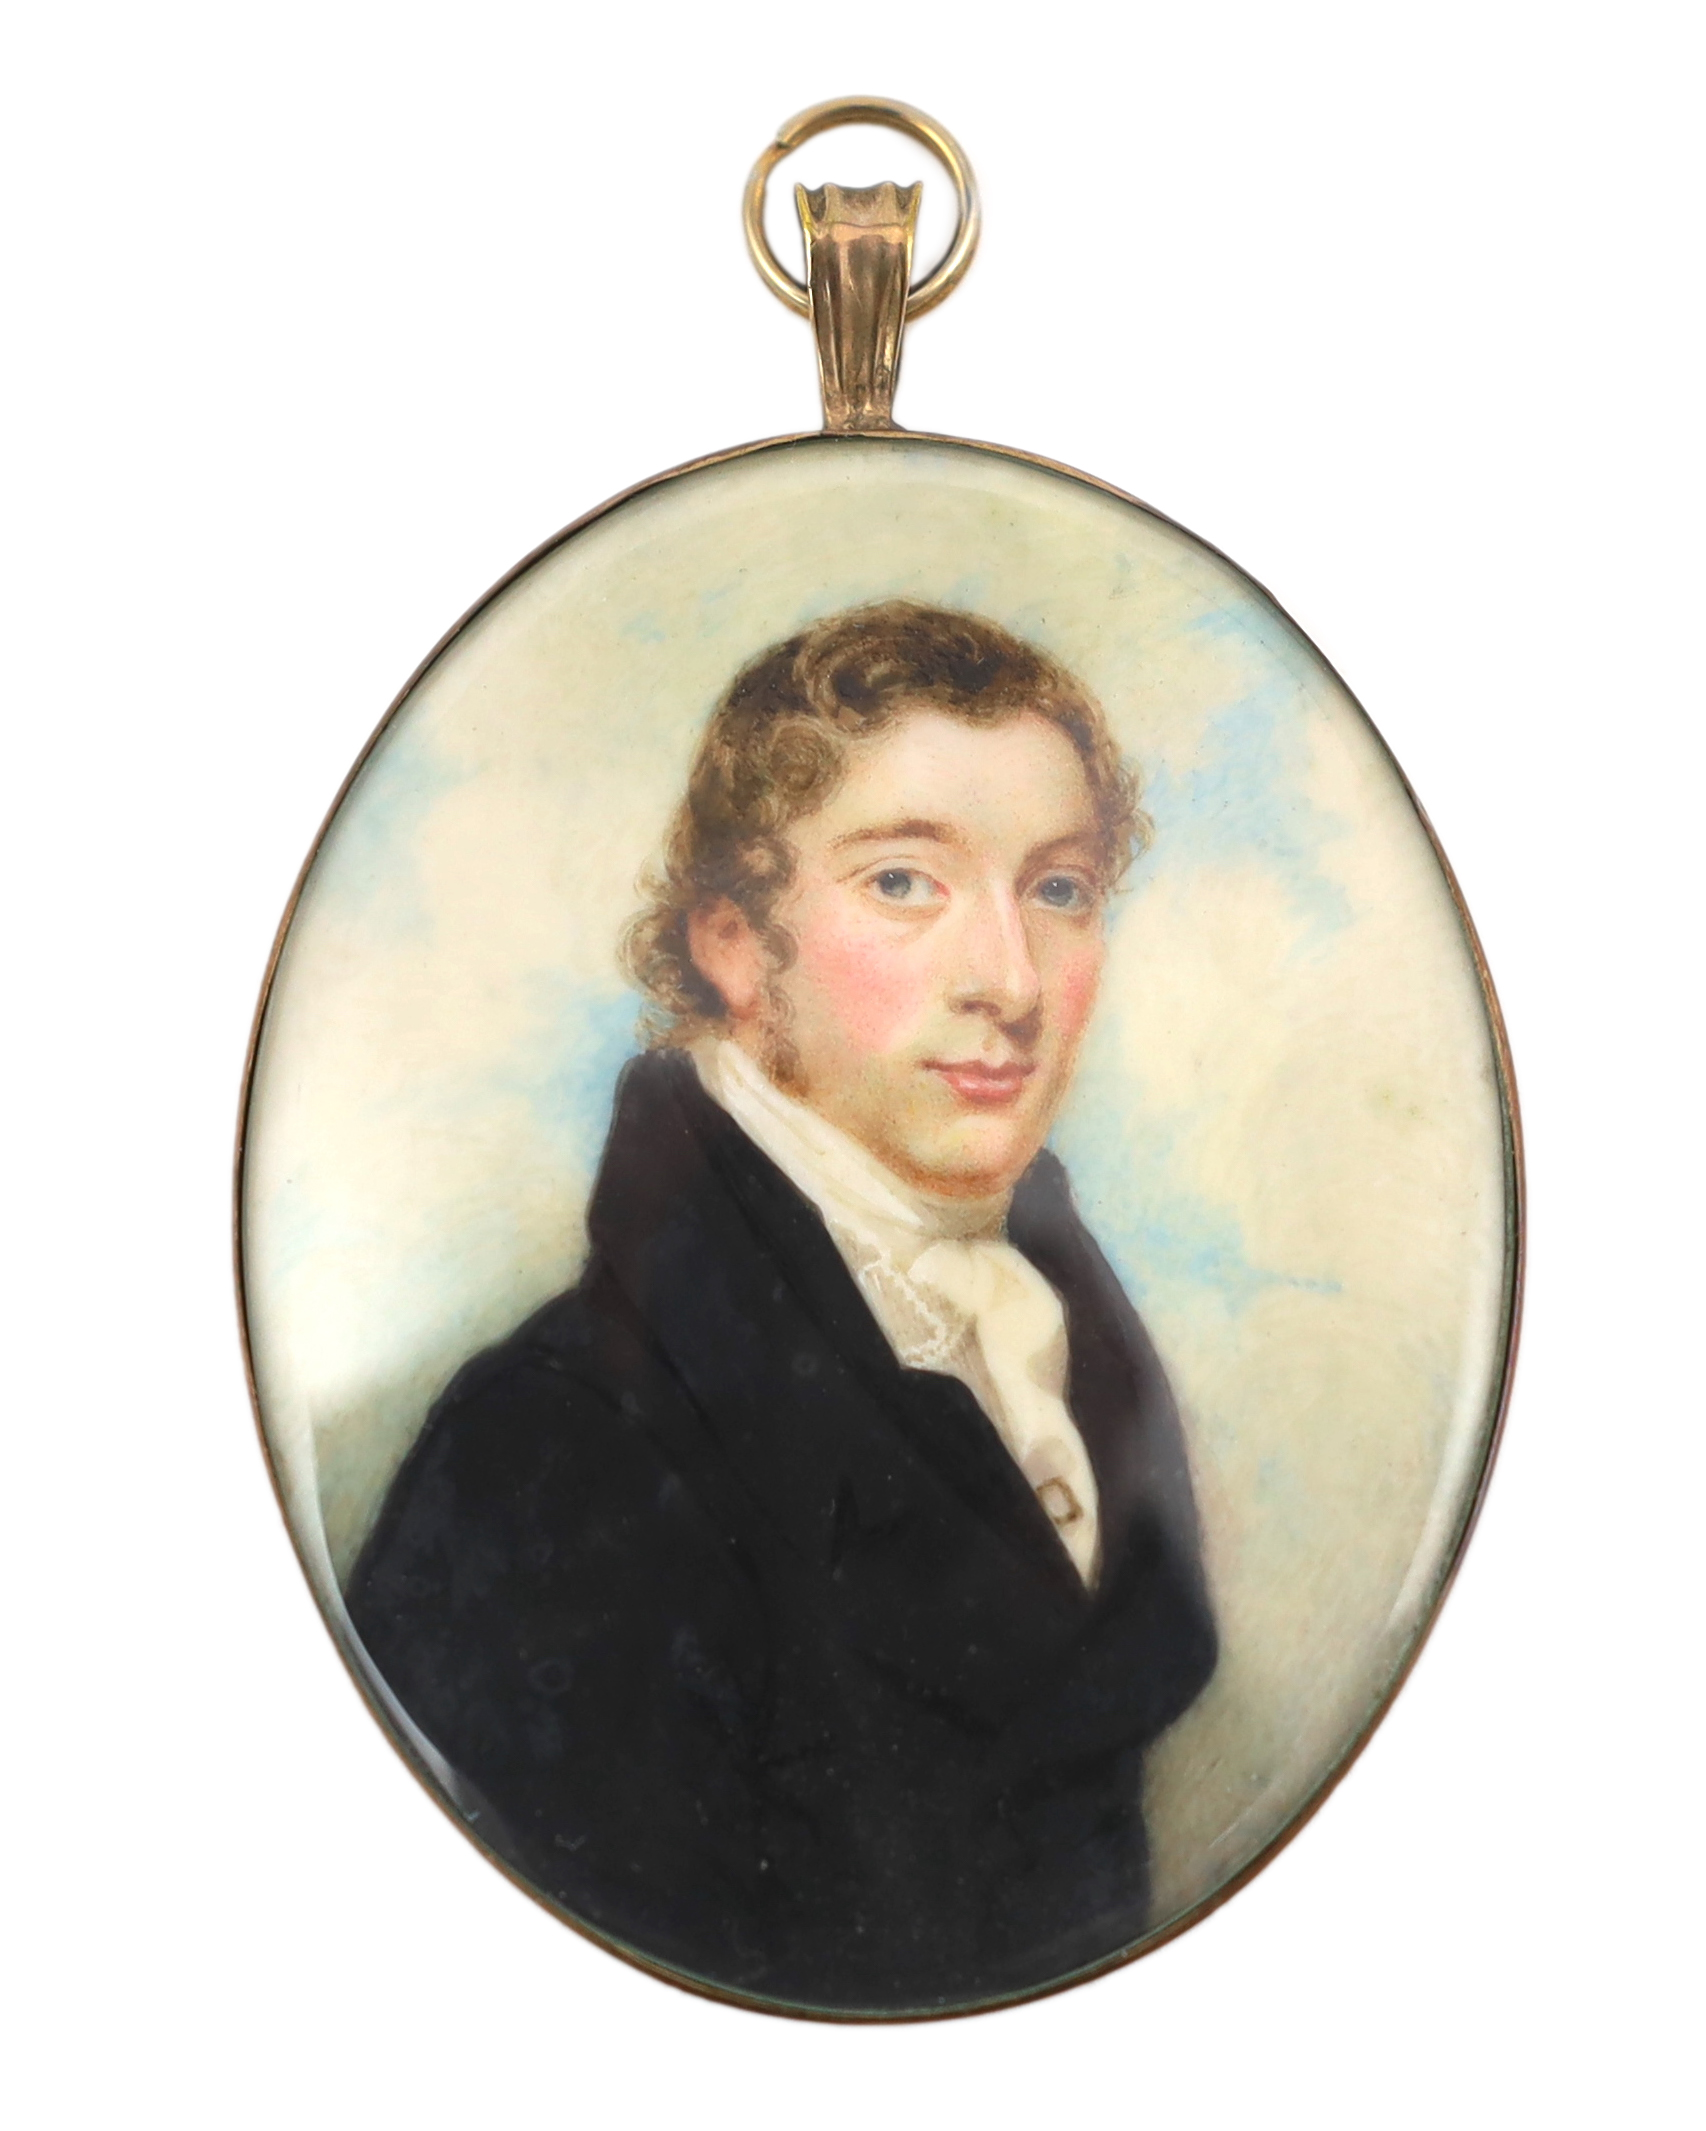 Henry Jacob Burch (British, b.1763), Portrait miniature of a gentleman, watercolour on ivory, 6.4 x 5cm. CITES Submission reference FFNBNQX2